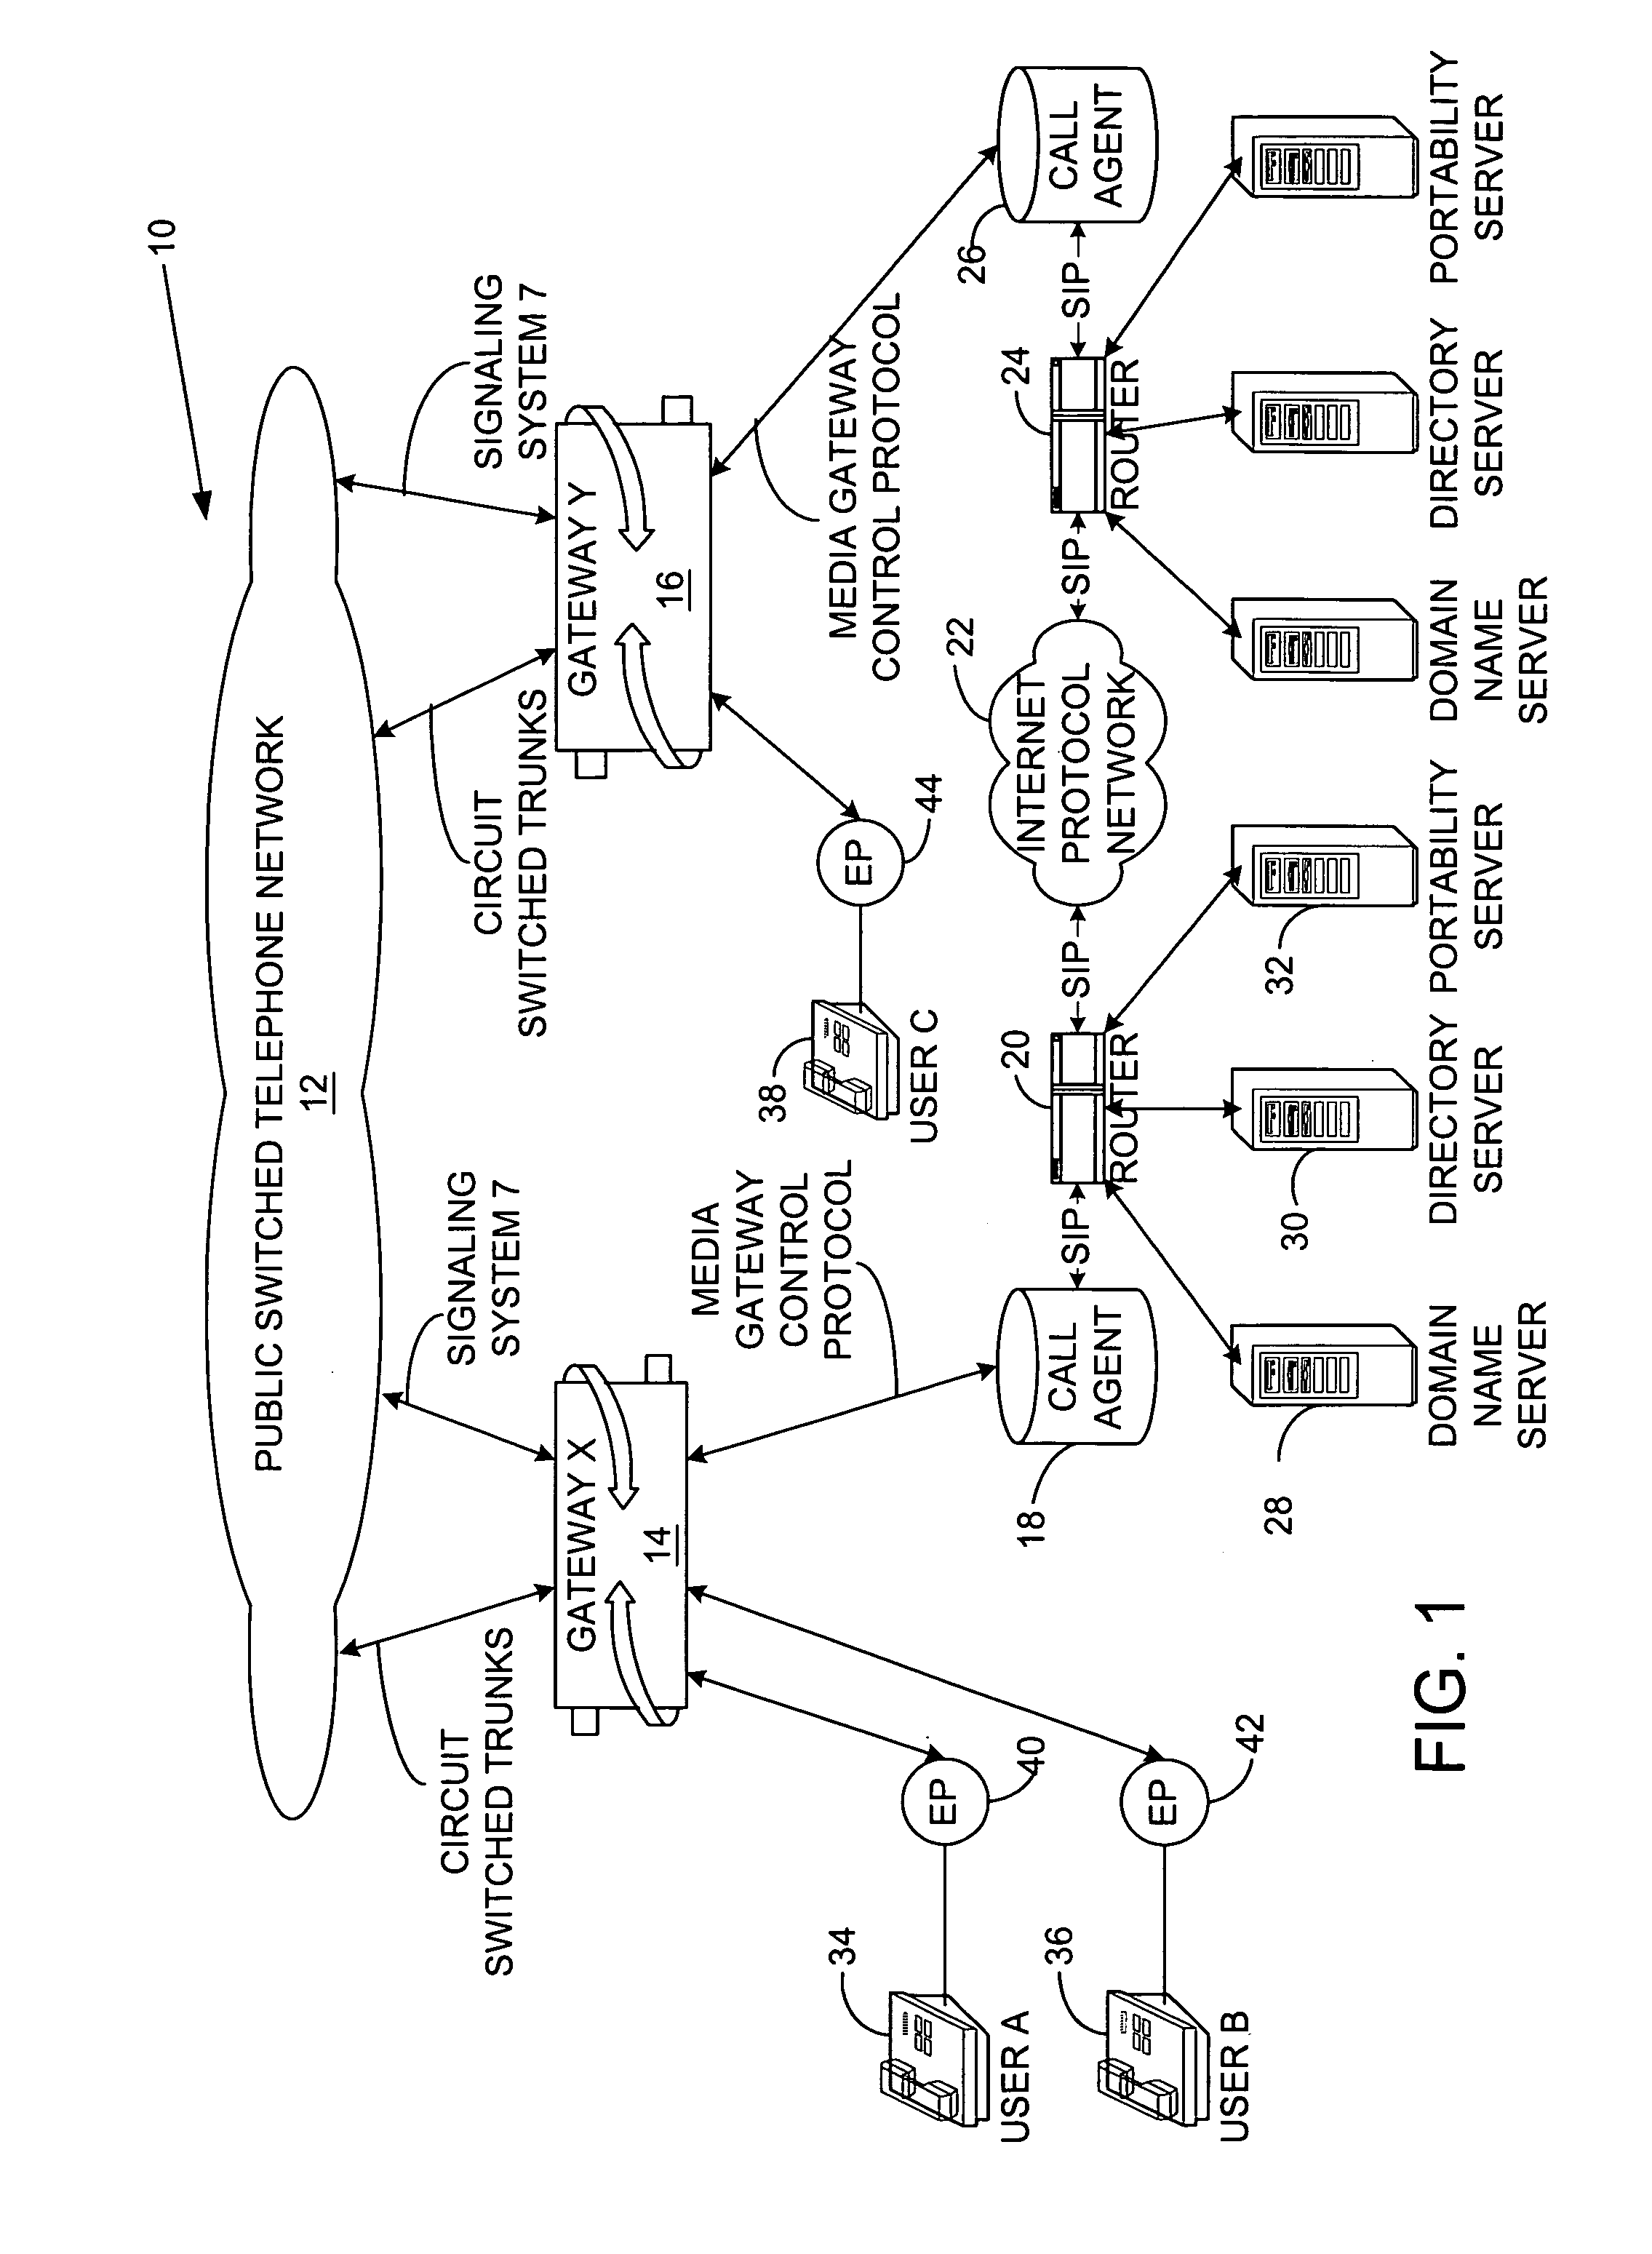 System and method for providing call management services in a virtual private network using voice or video over internet protocol